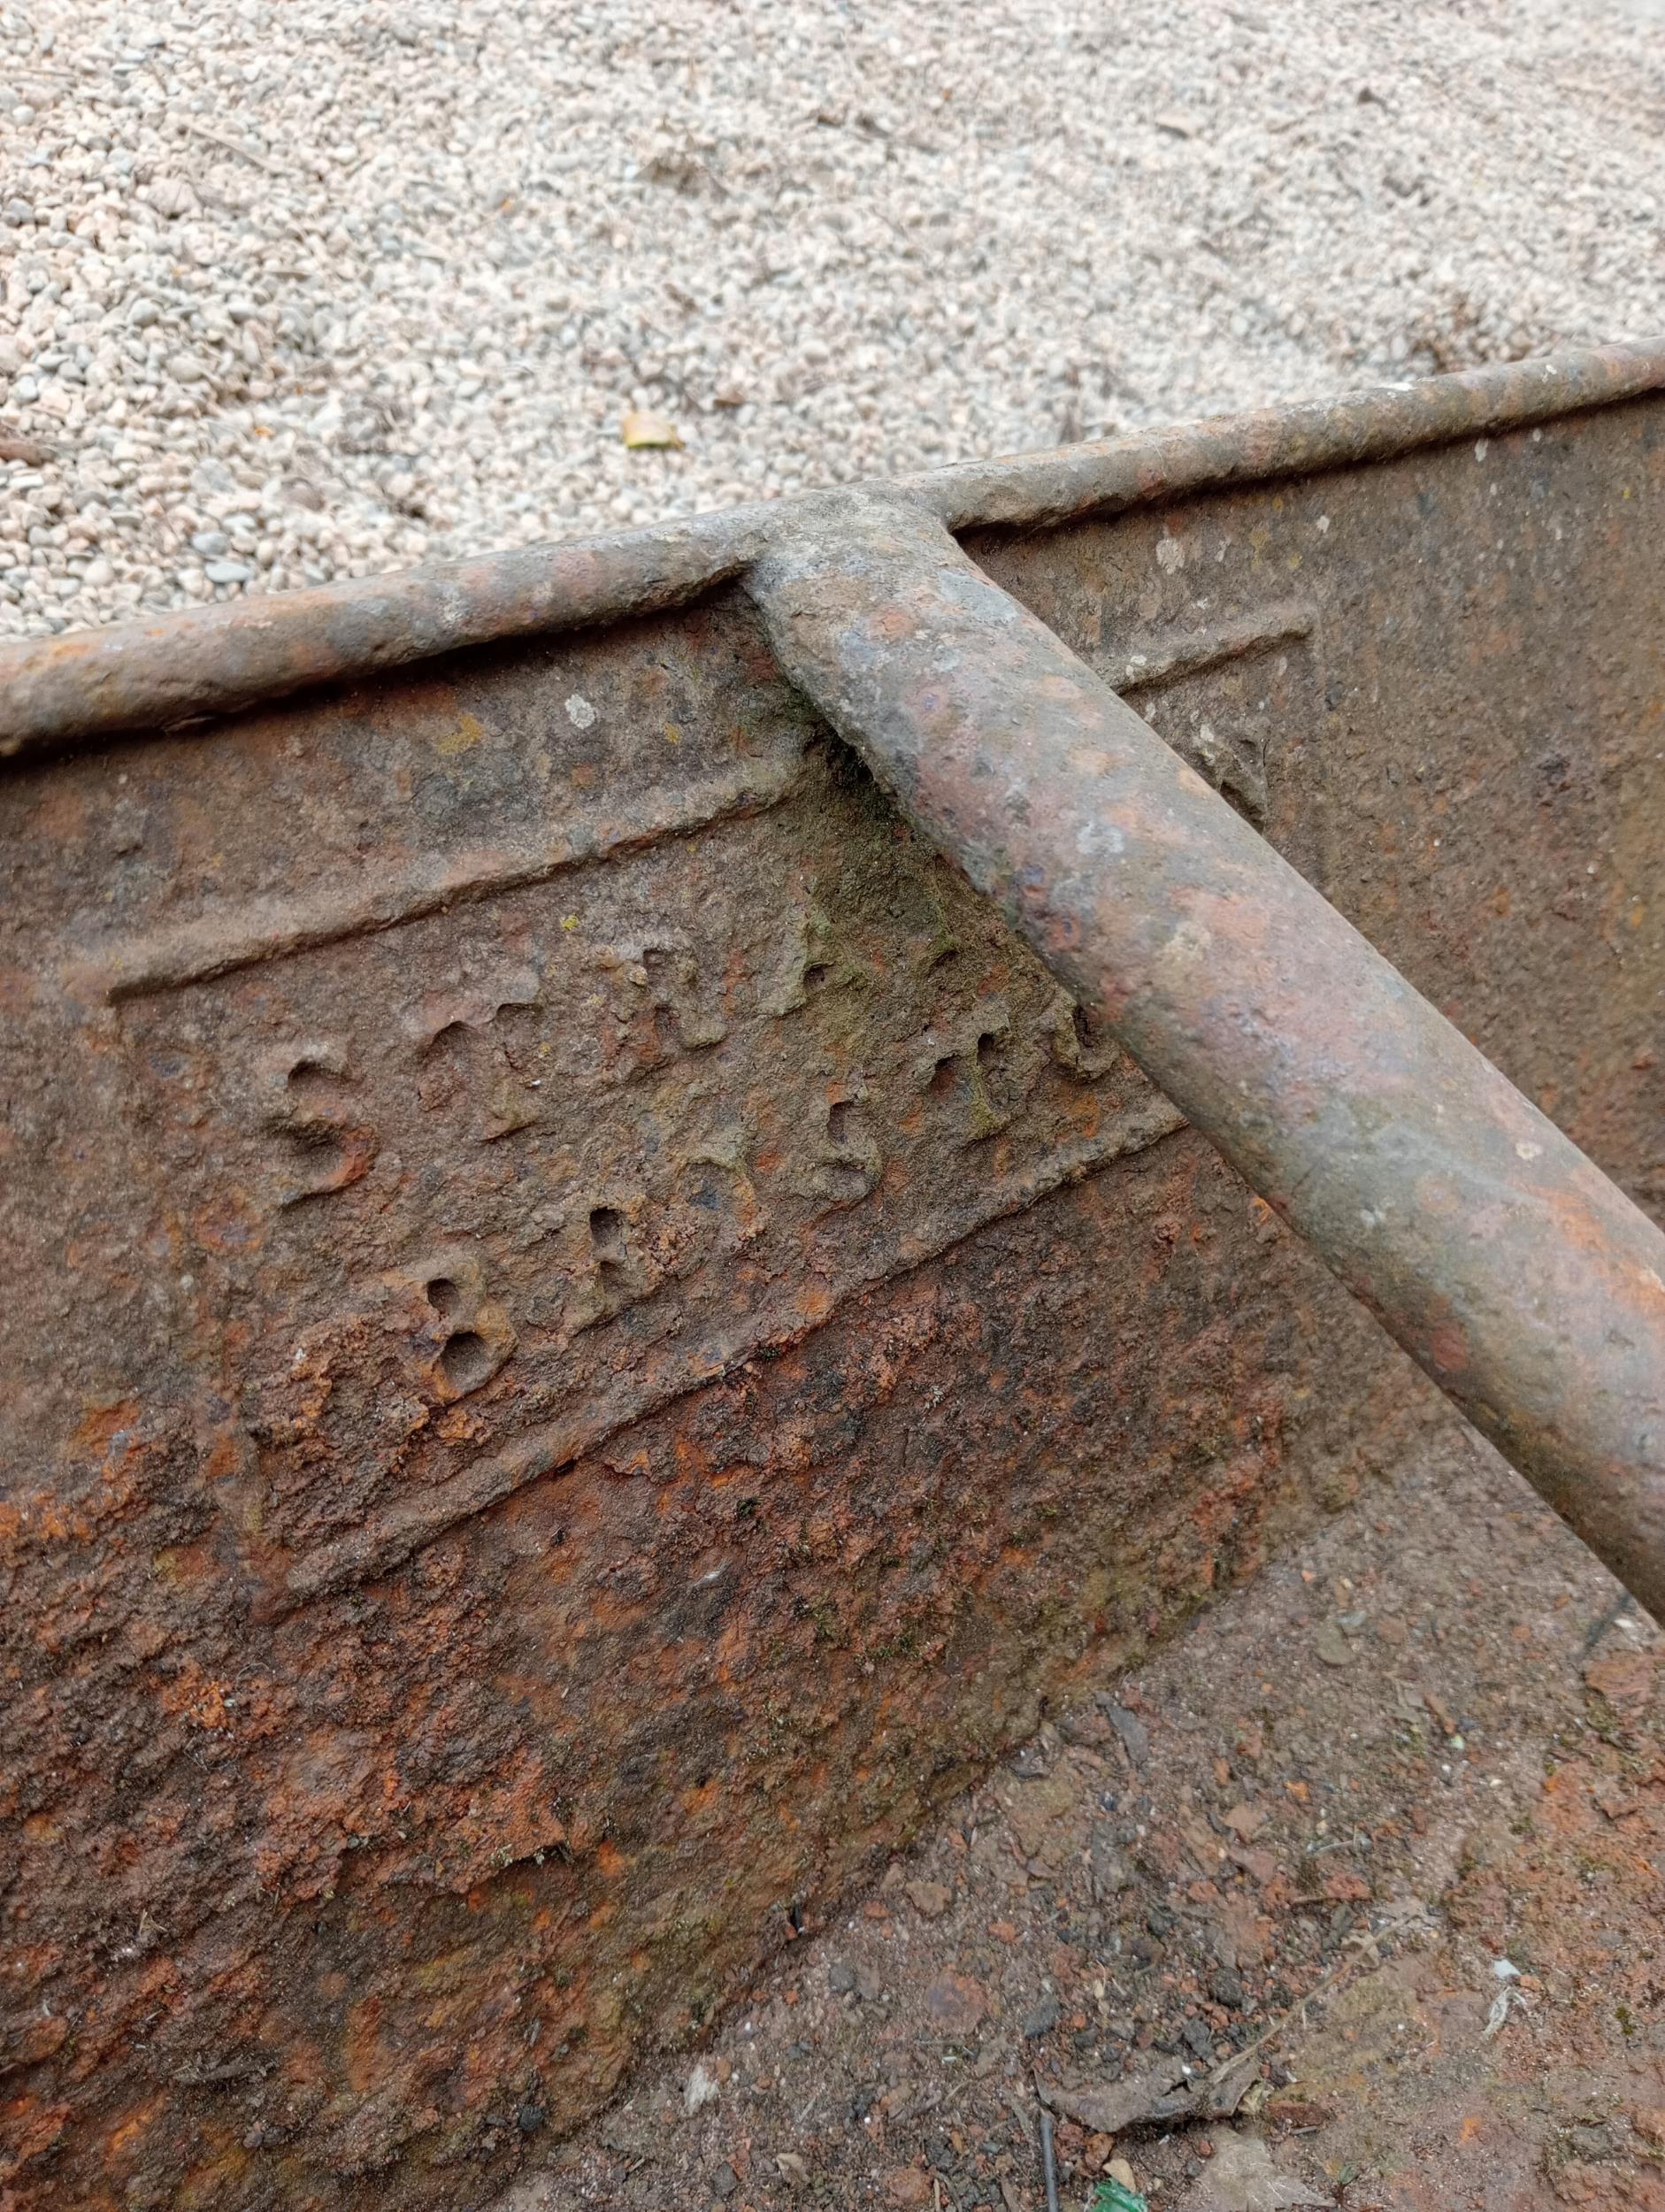 Cast iron feeding trough {H 28cm x W 142cm x D 30cm }. (NOT AVAILABLE TO VIEW IN PERSON) - Image 3 of 3